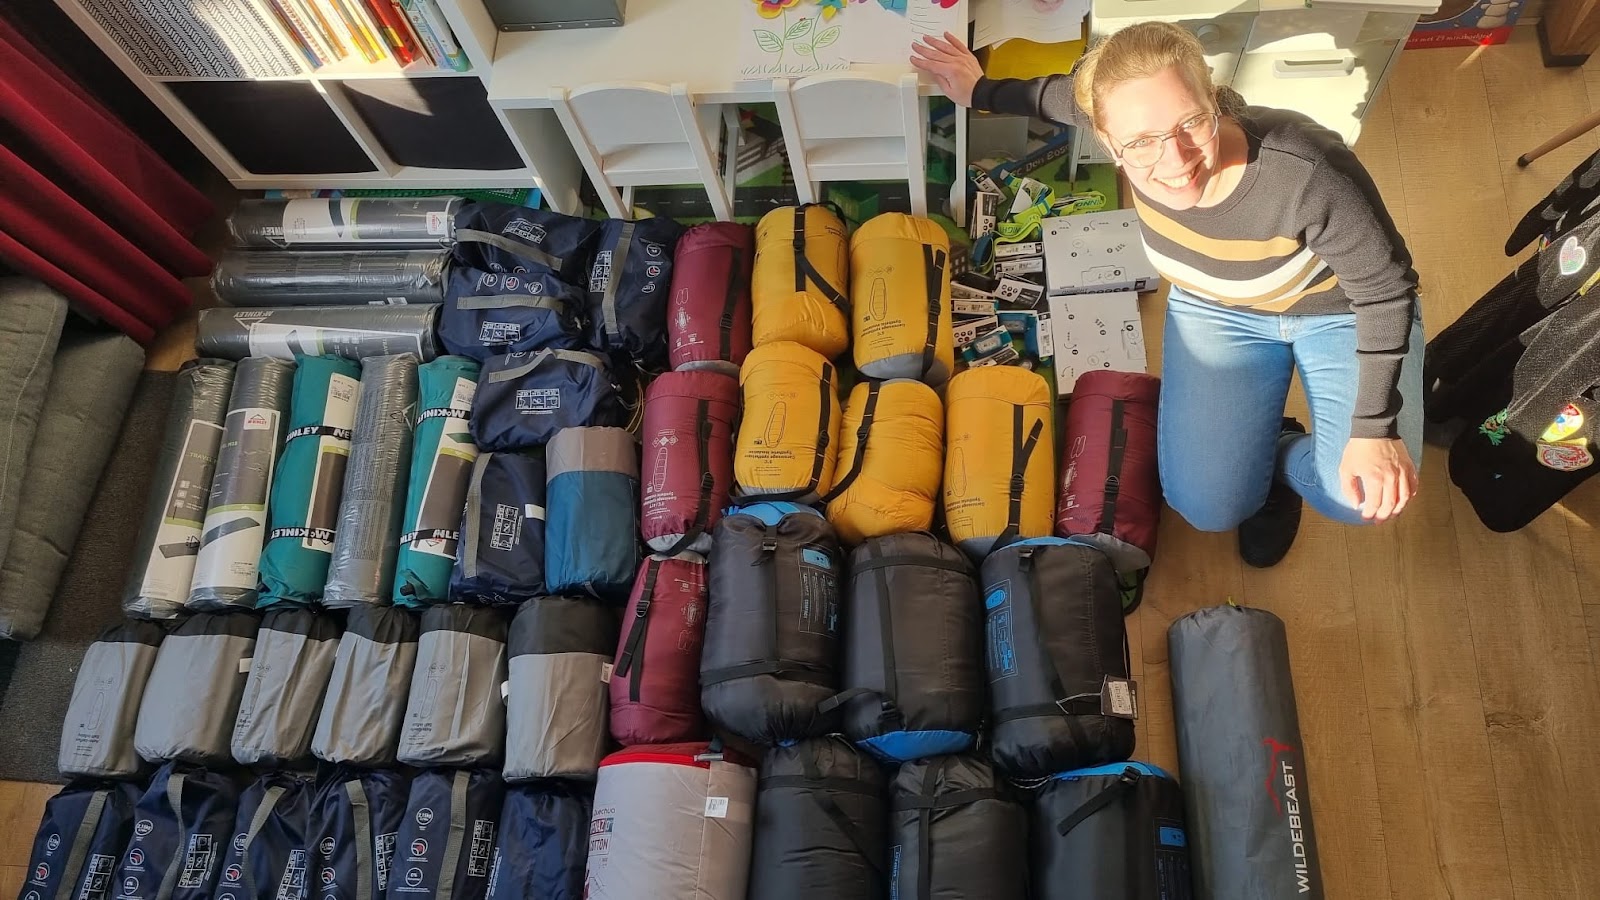 A volunteer helping with collecting large amount of sleepingbags for adults.